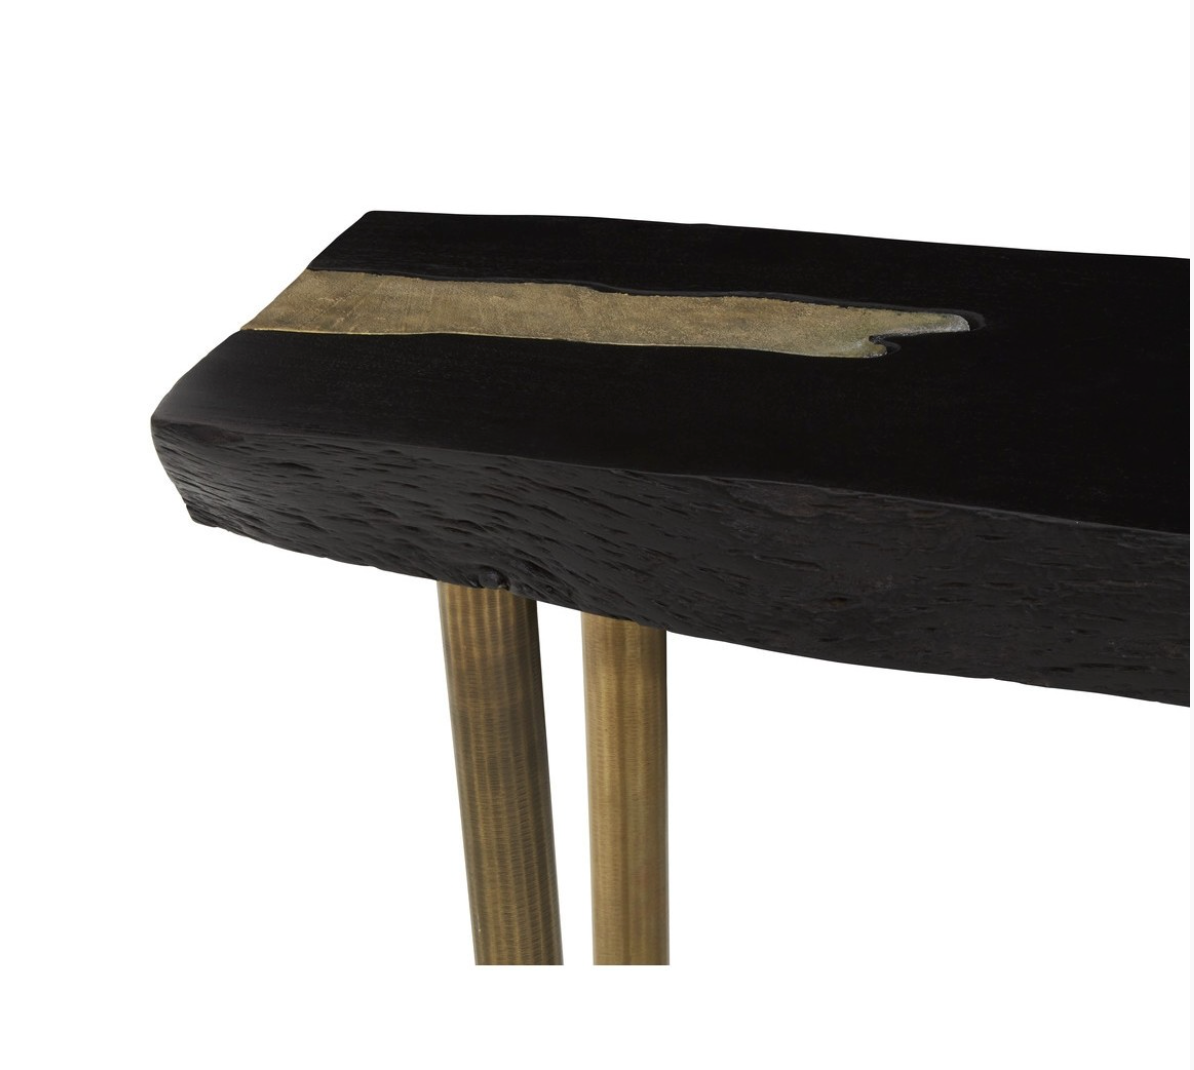 'TREE OF LIFE' CONSOLE TABLE